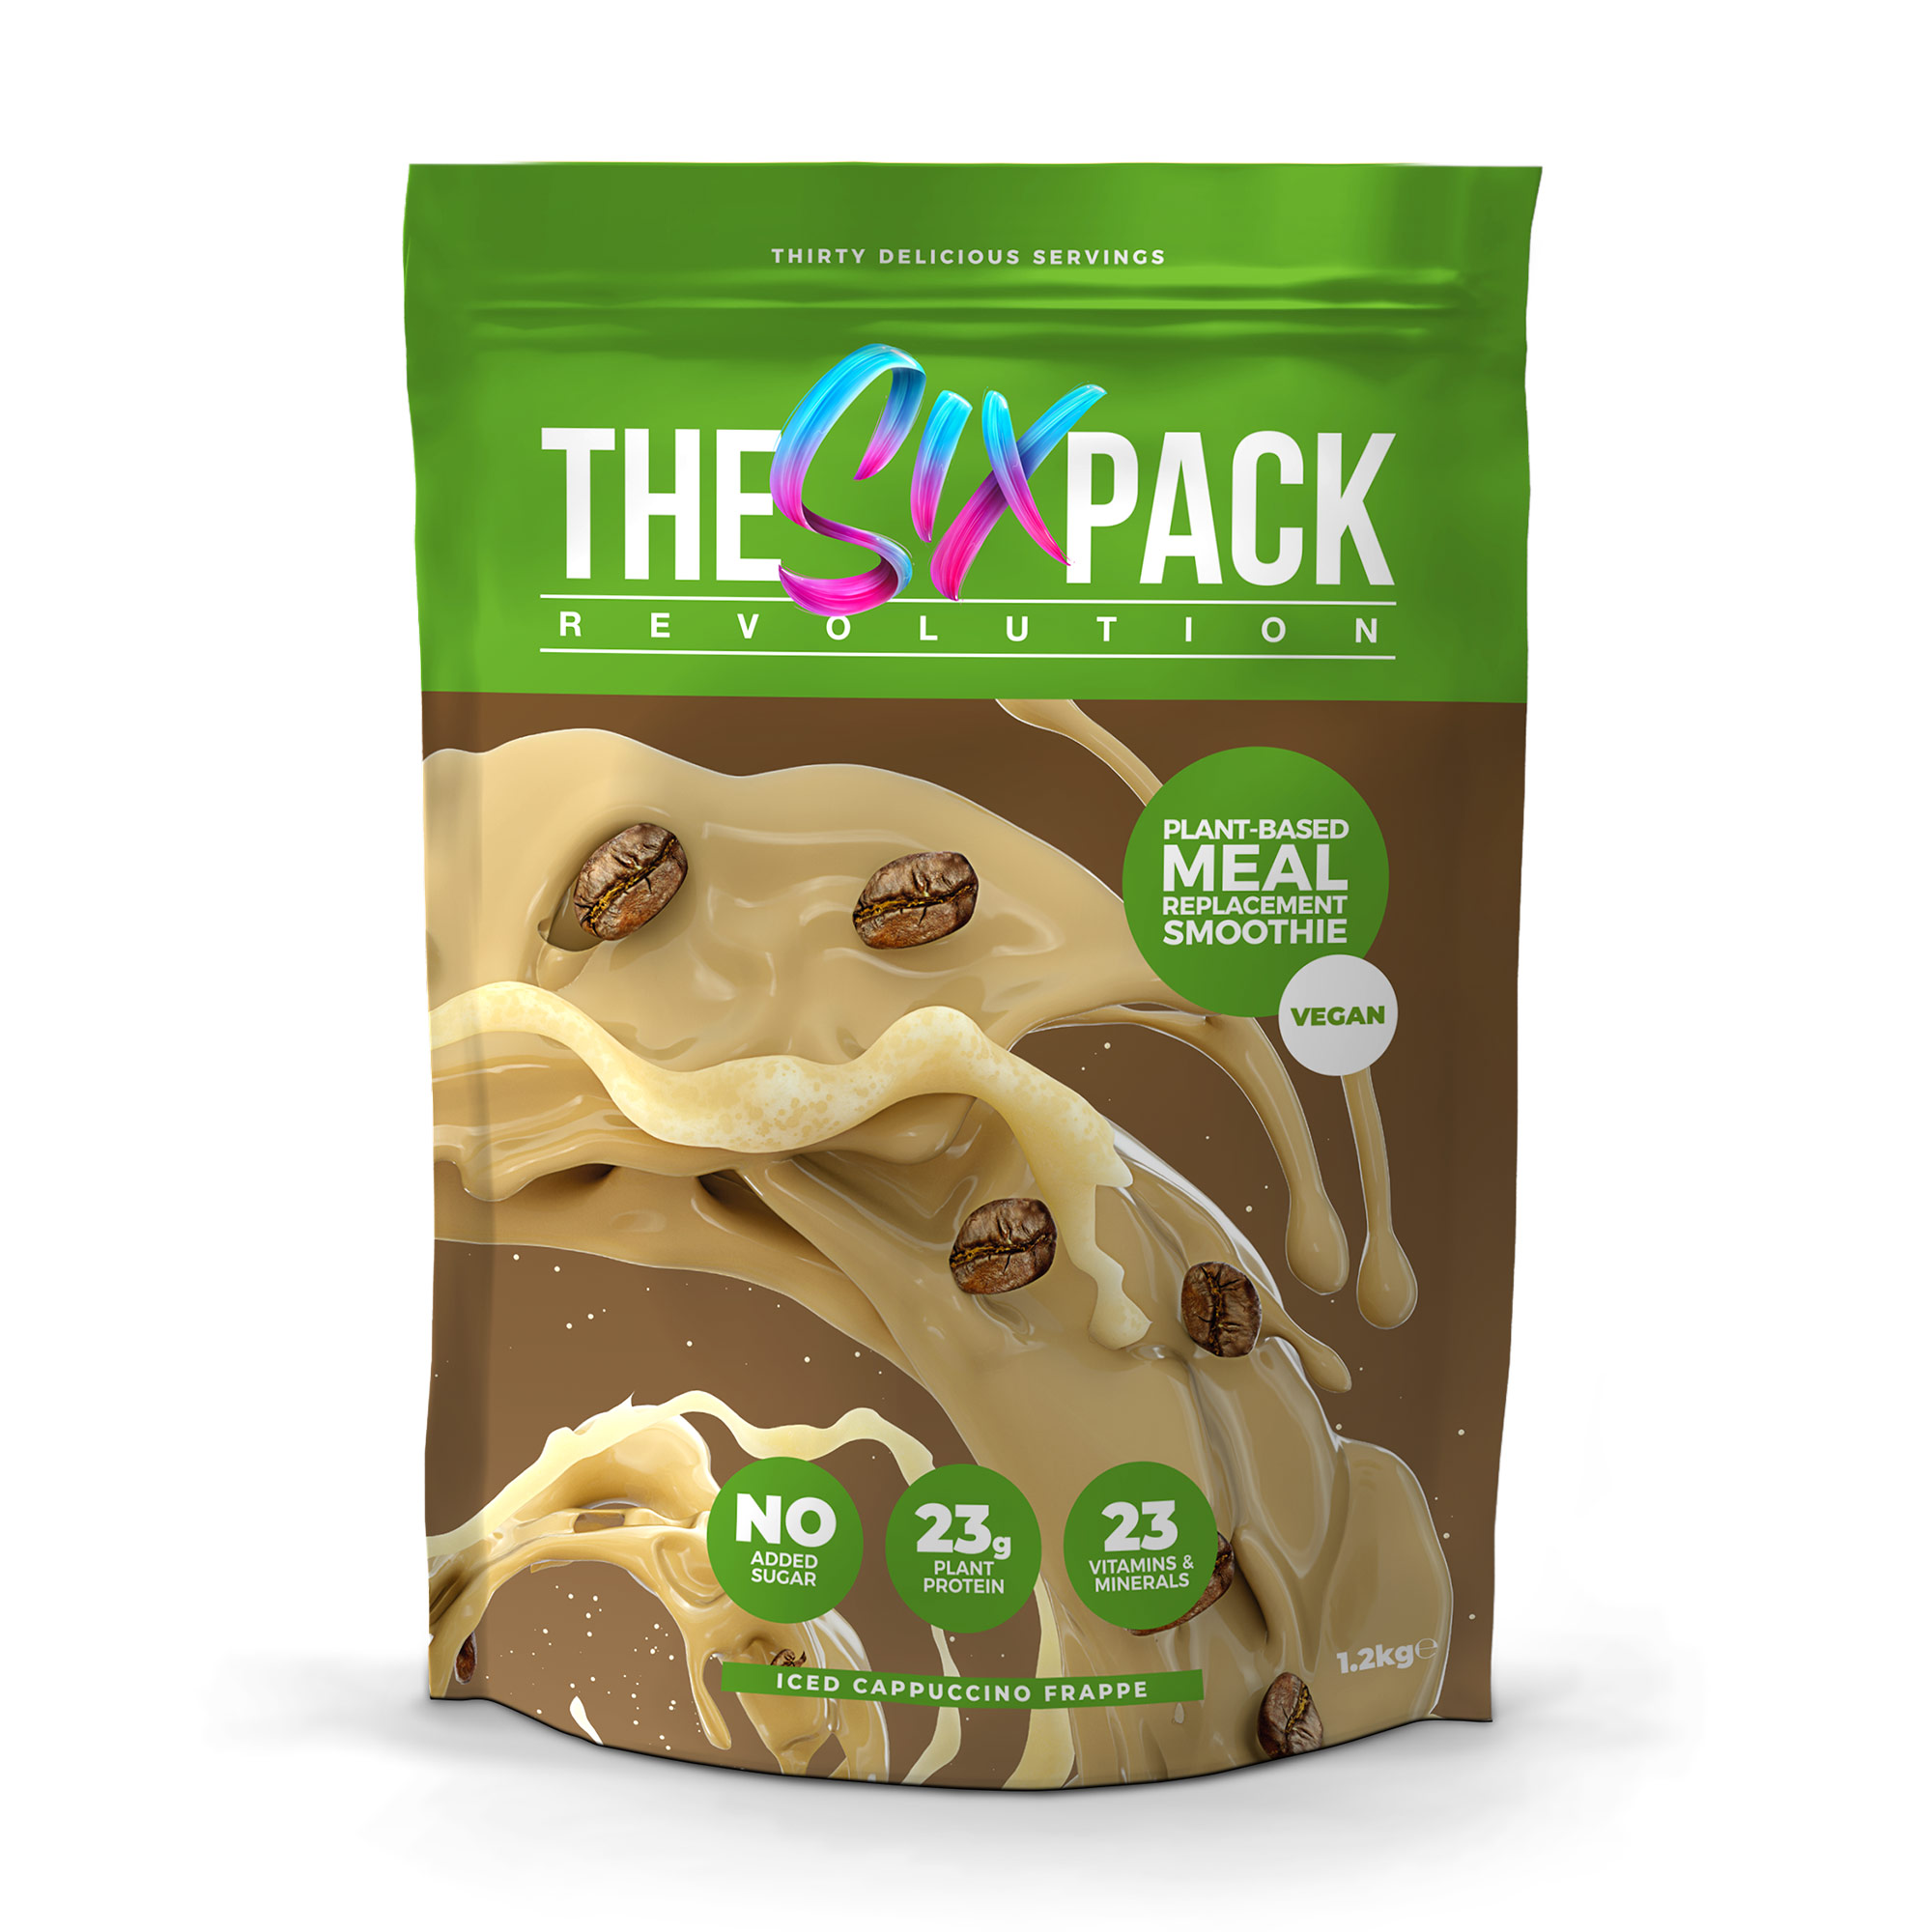 The Six Pack Revolution Vegan Meal Replacement Iced Coffee